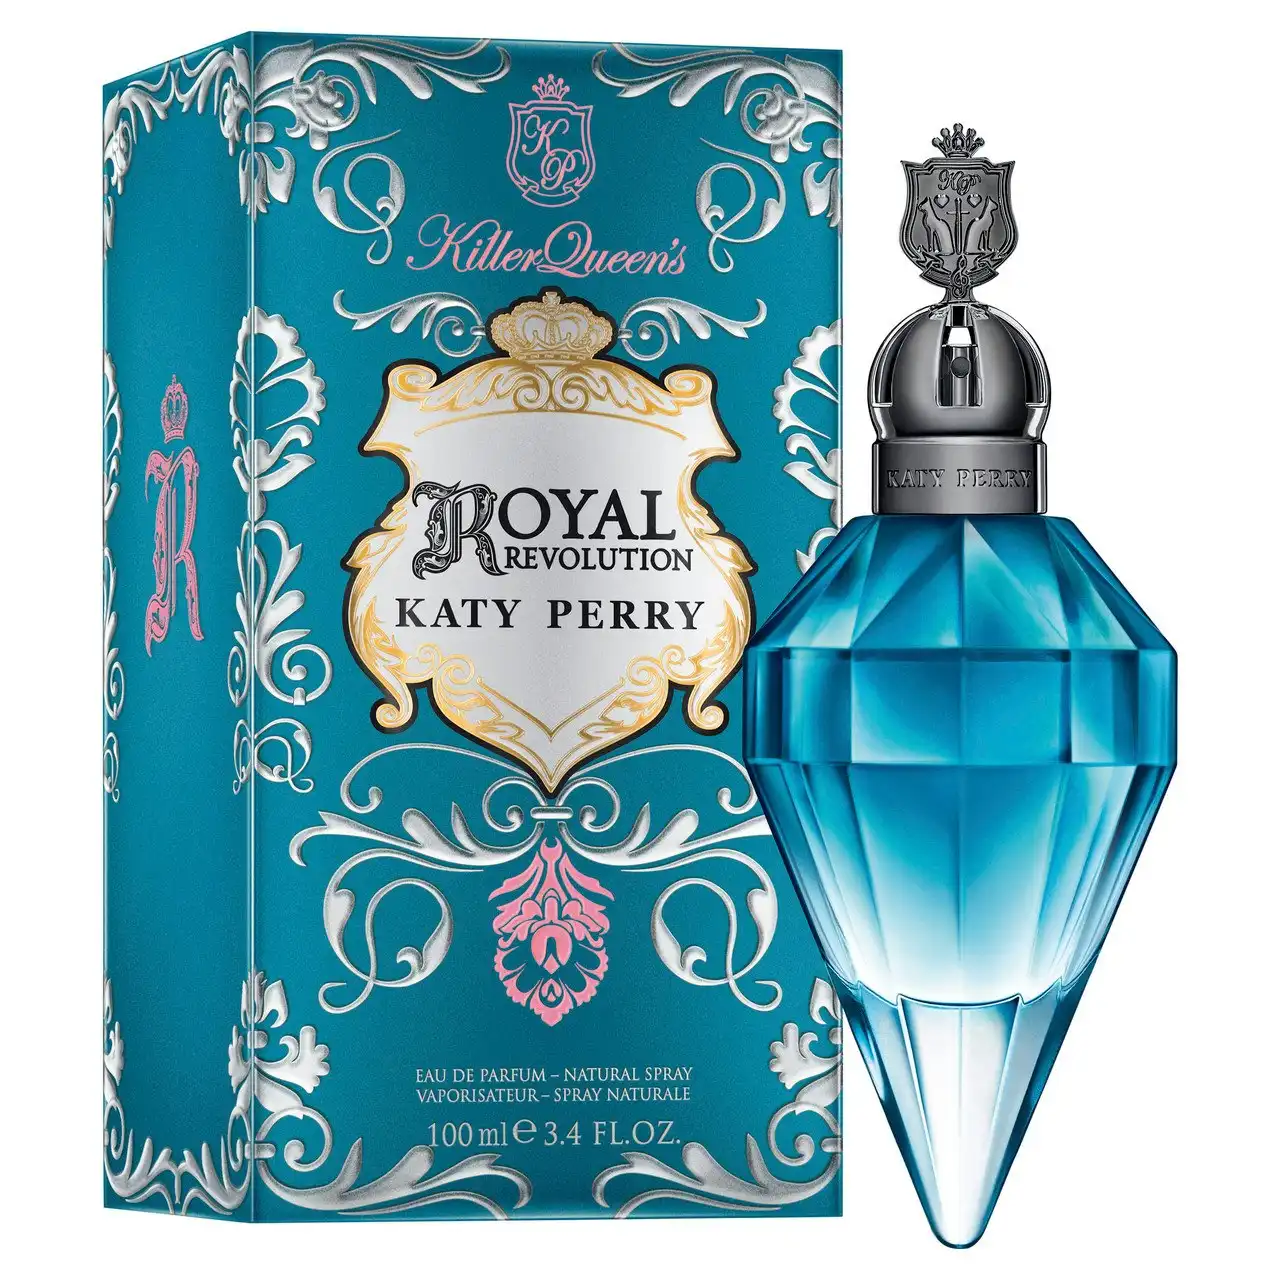 Killer Queen's Royal Revolution 100ml EDP By Katy Perry (Womens)